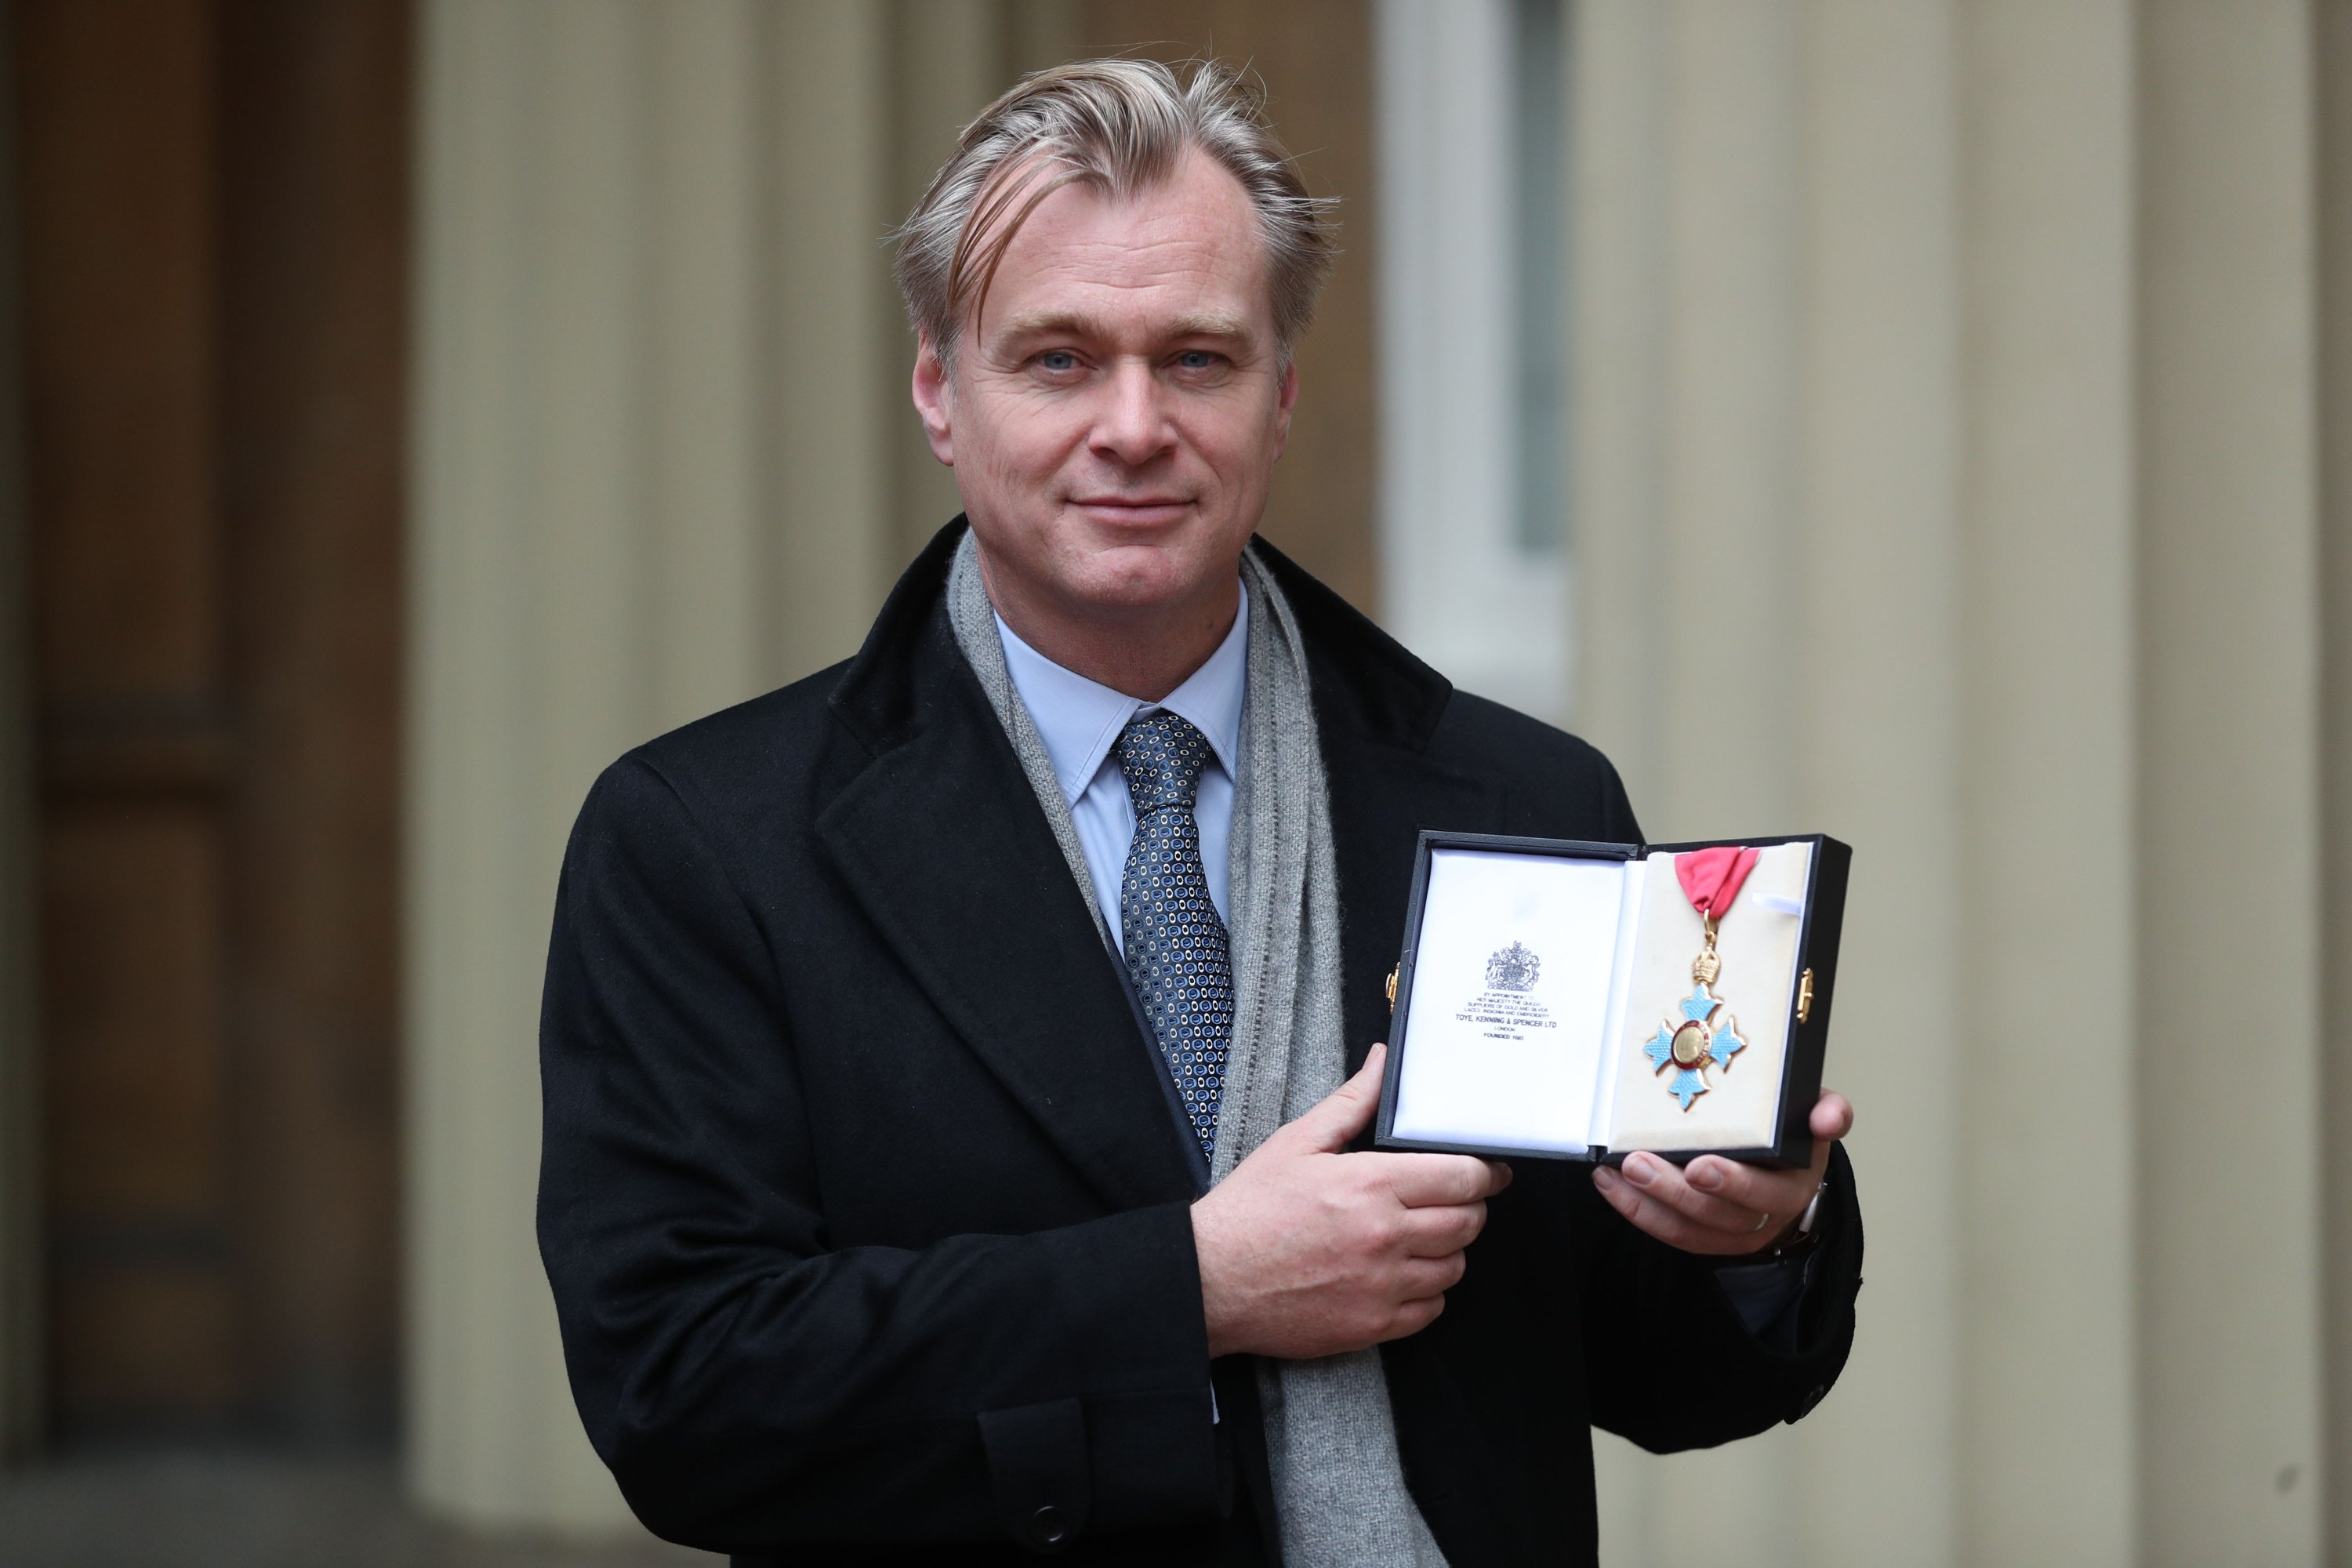 British-American director Christopher Nolan poses with his medal after he was made a Commander of the British Empire (CBE) for services to film during an investiture ceremony at Buckingham Palace, London, Dec. 19, 2019. (AFP Photo)